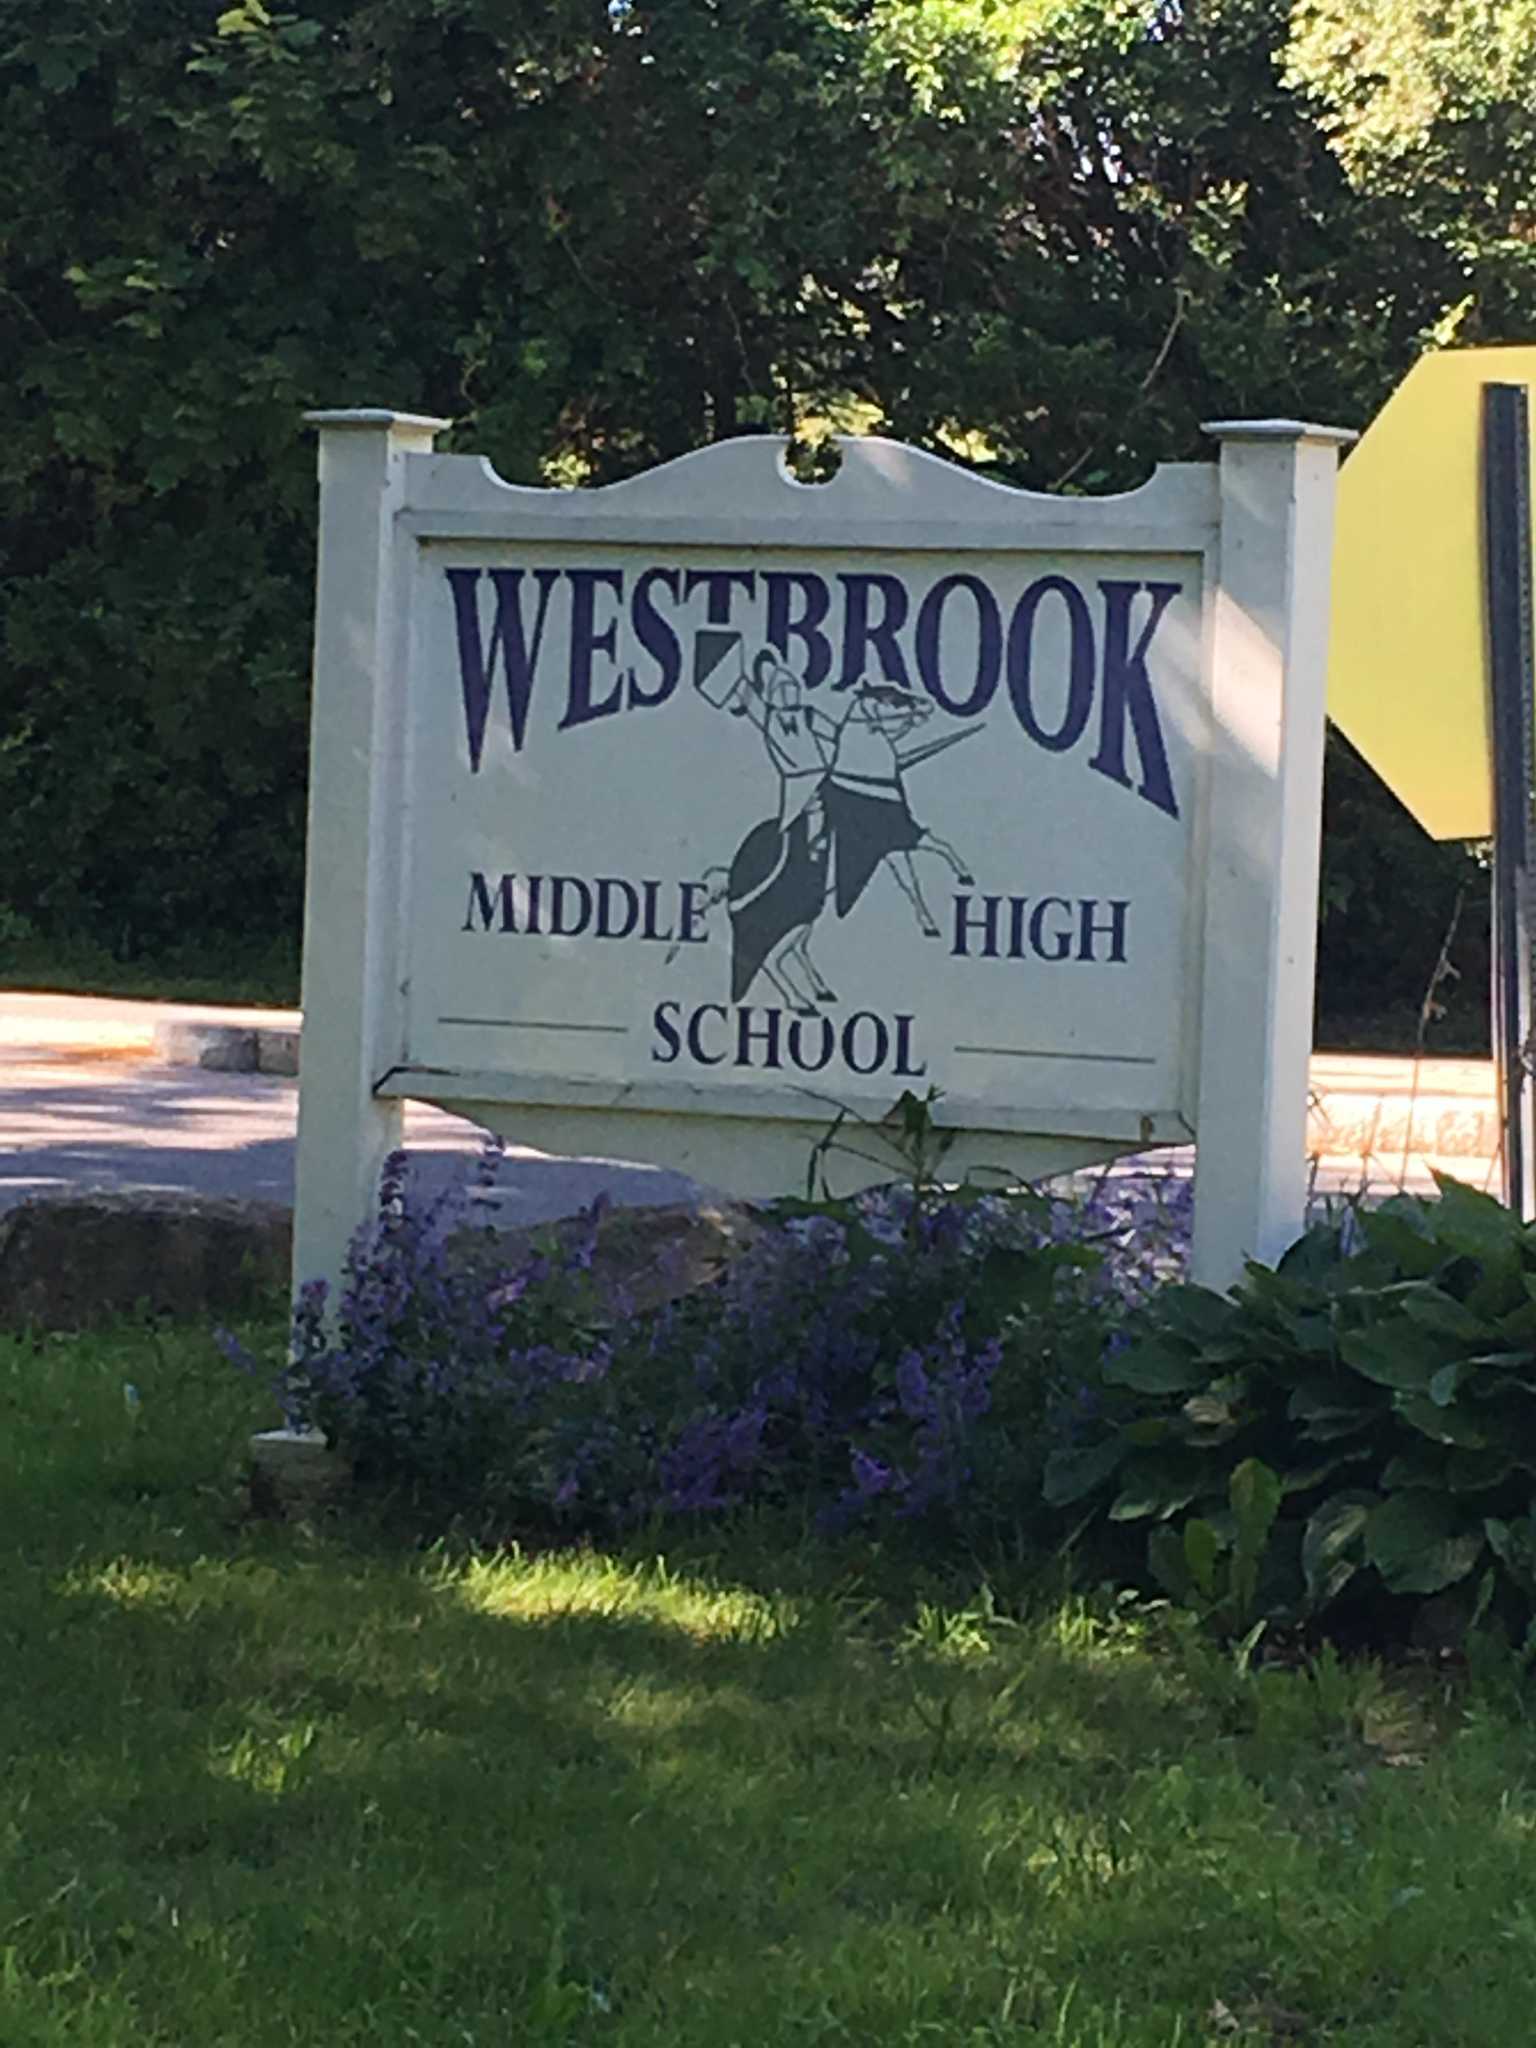 Westbrook HS switches to distance learning through Wednesday after coronavirus case